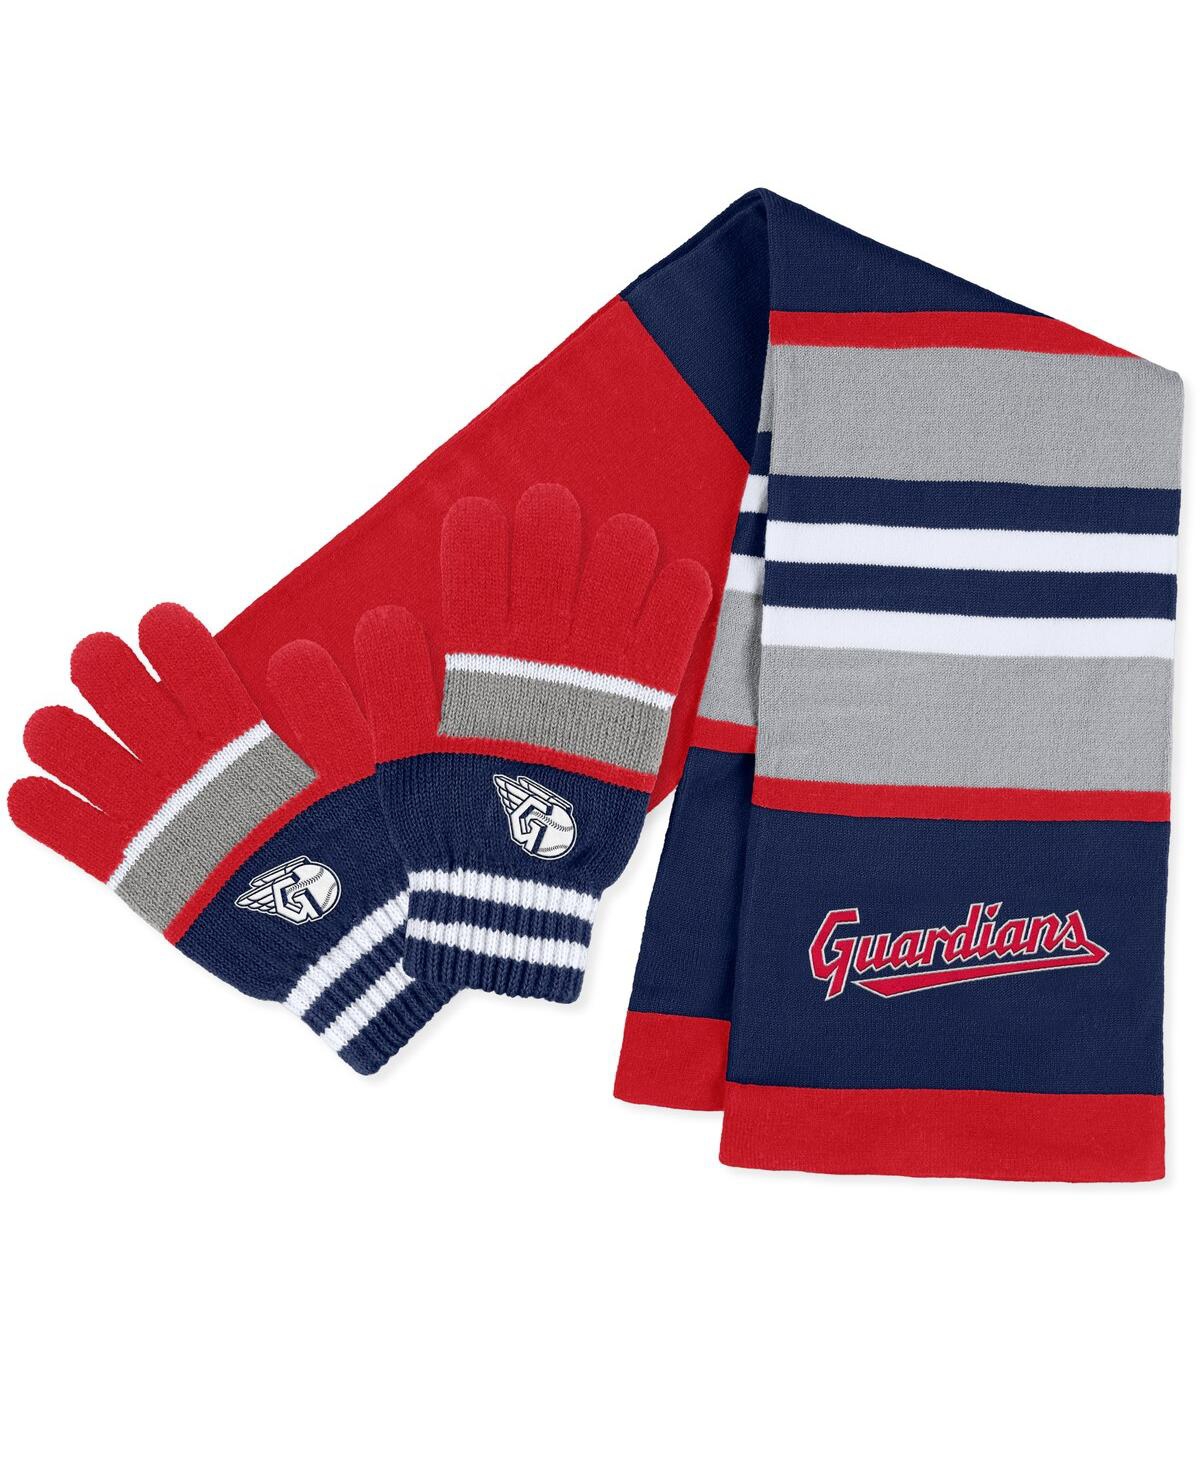 Women's Wear by Erin Andrews Cleveland Guardians Stripe Glove and Scarf Set - Red, Navy